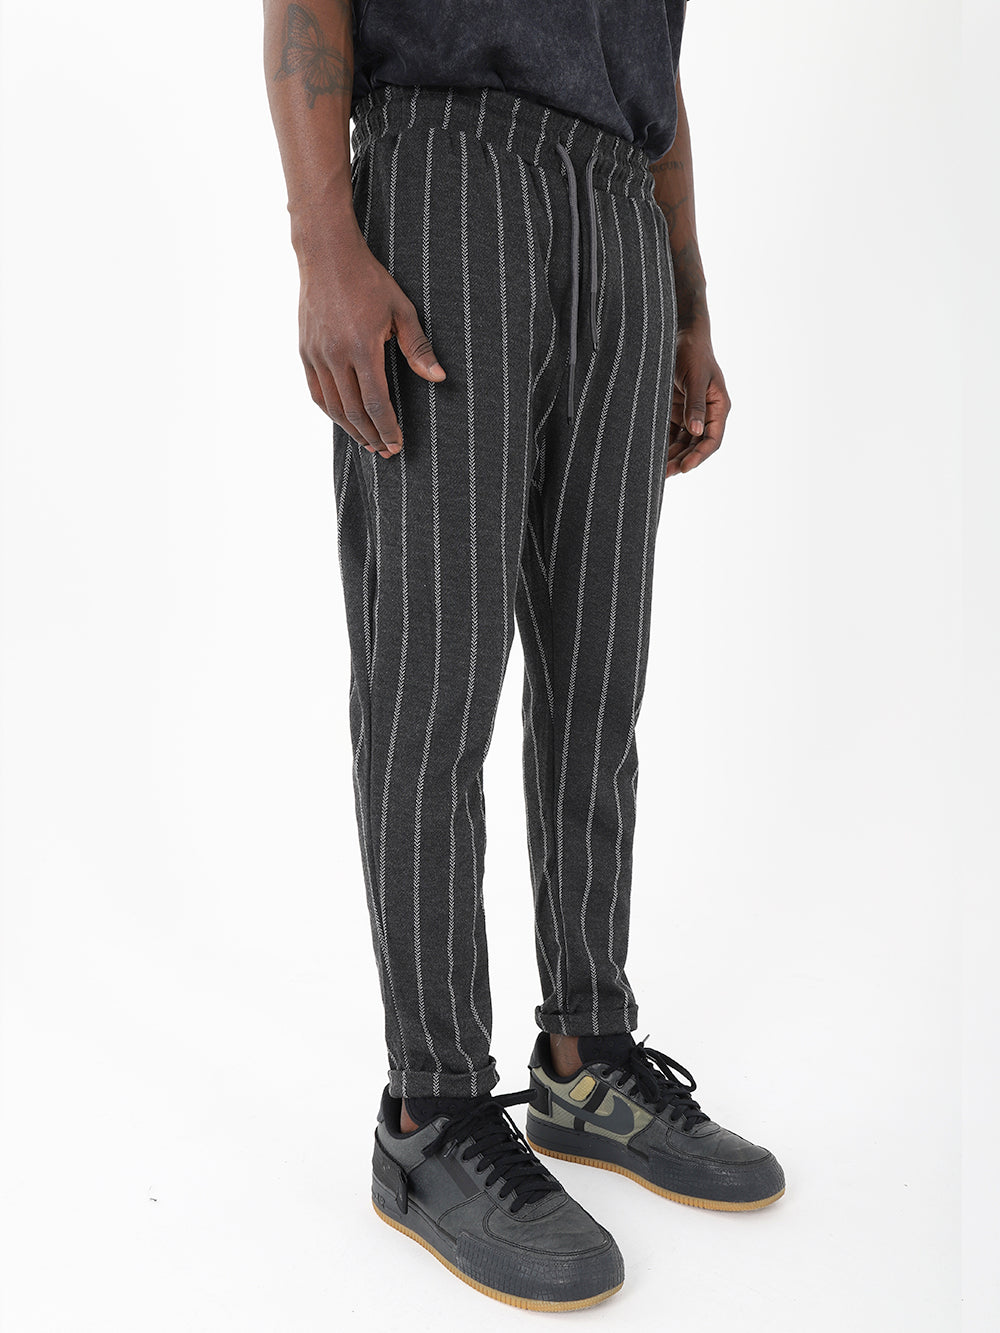 A man wearing POLARITY JOGGERS, black and white pinstripe jogger pants.